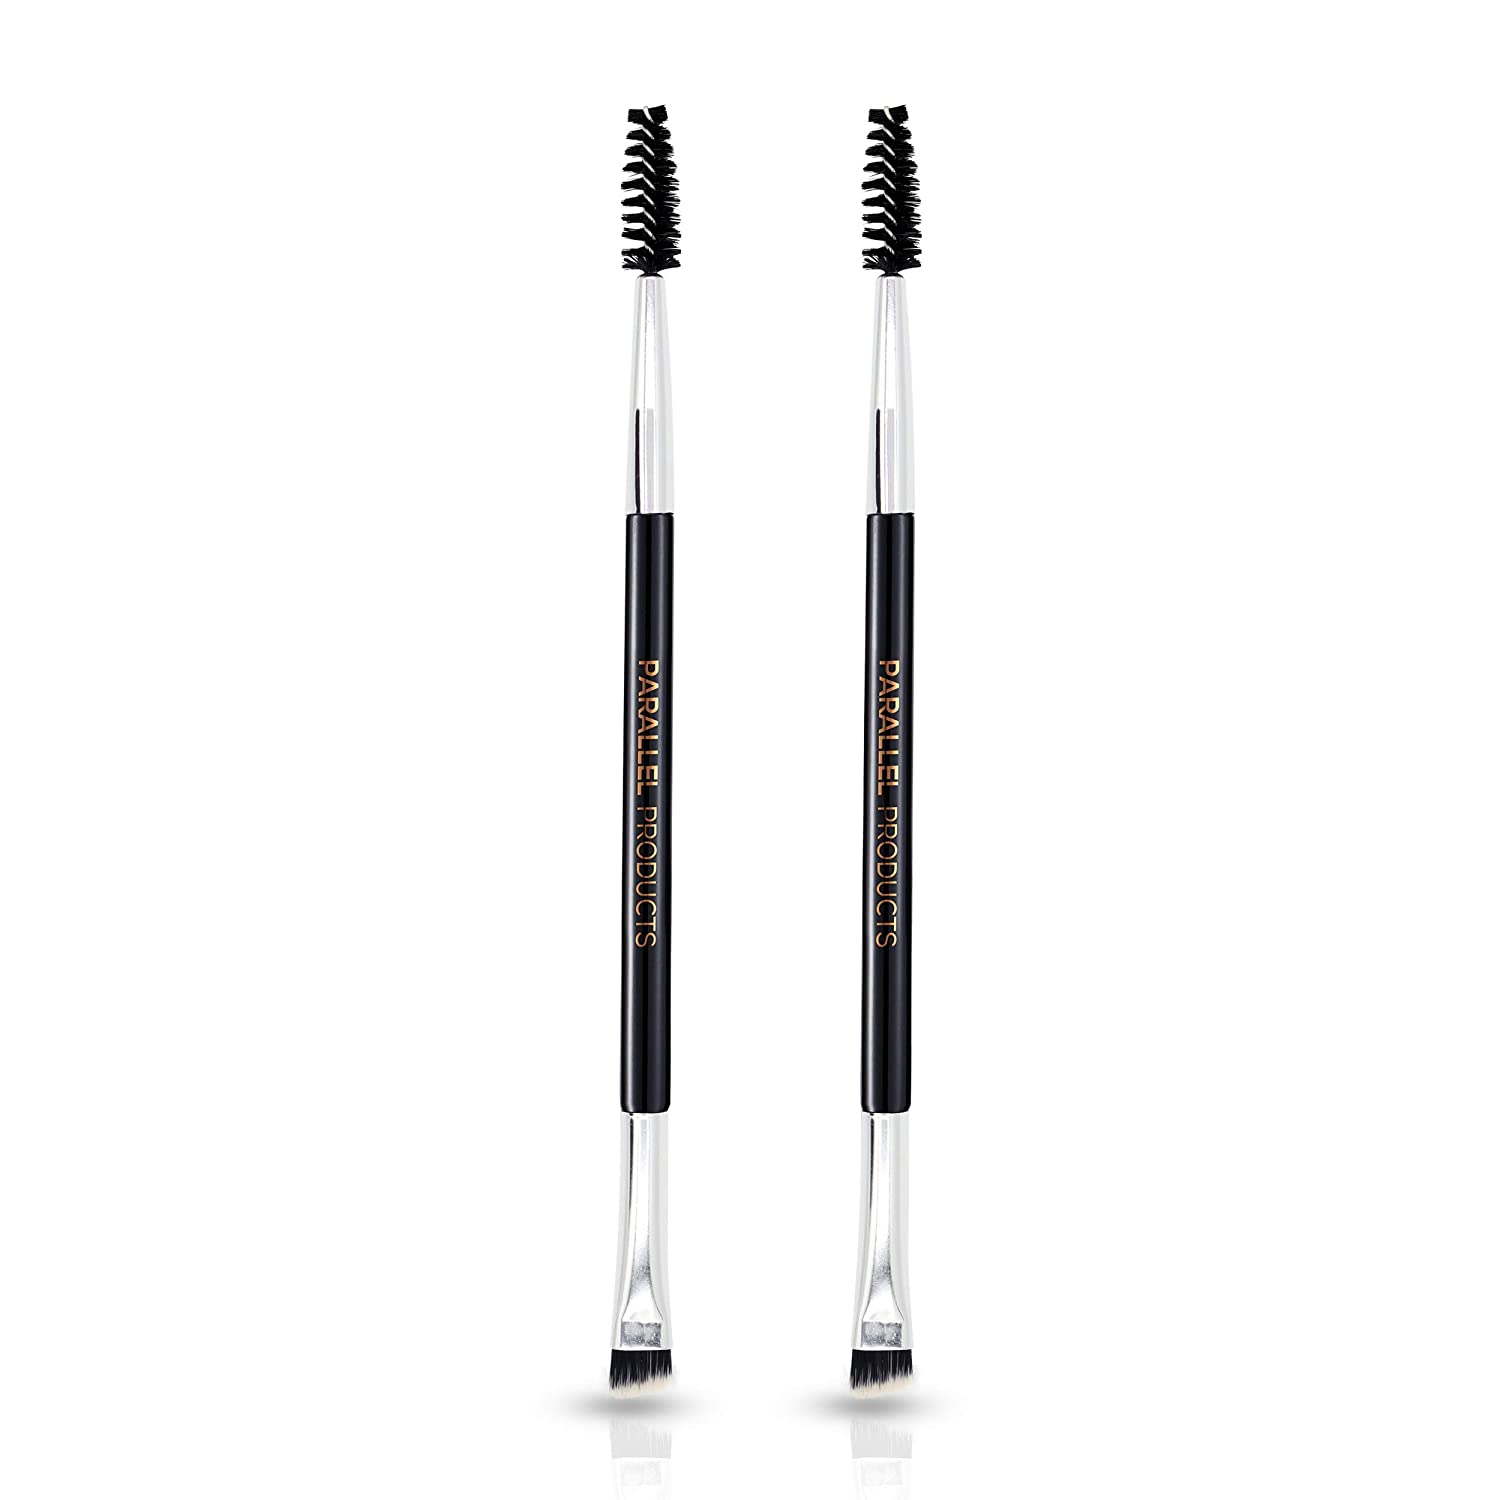 Parallel Products The Duo Brush Premium Angled Brow and Spoolie Brush Makeup Brush 2 Pack Side by Side